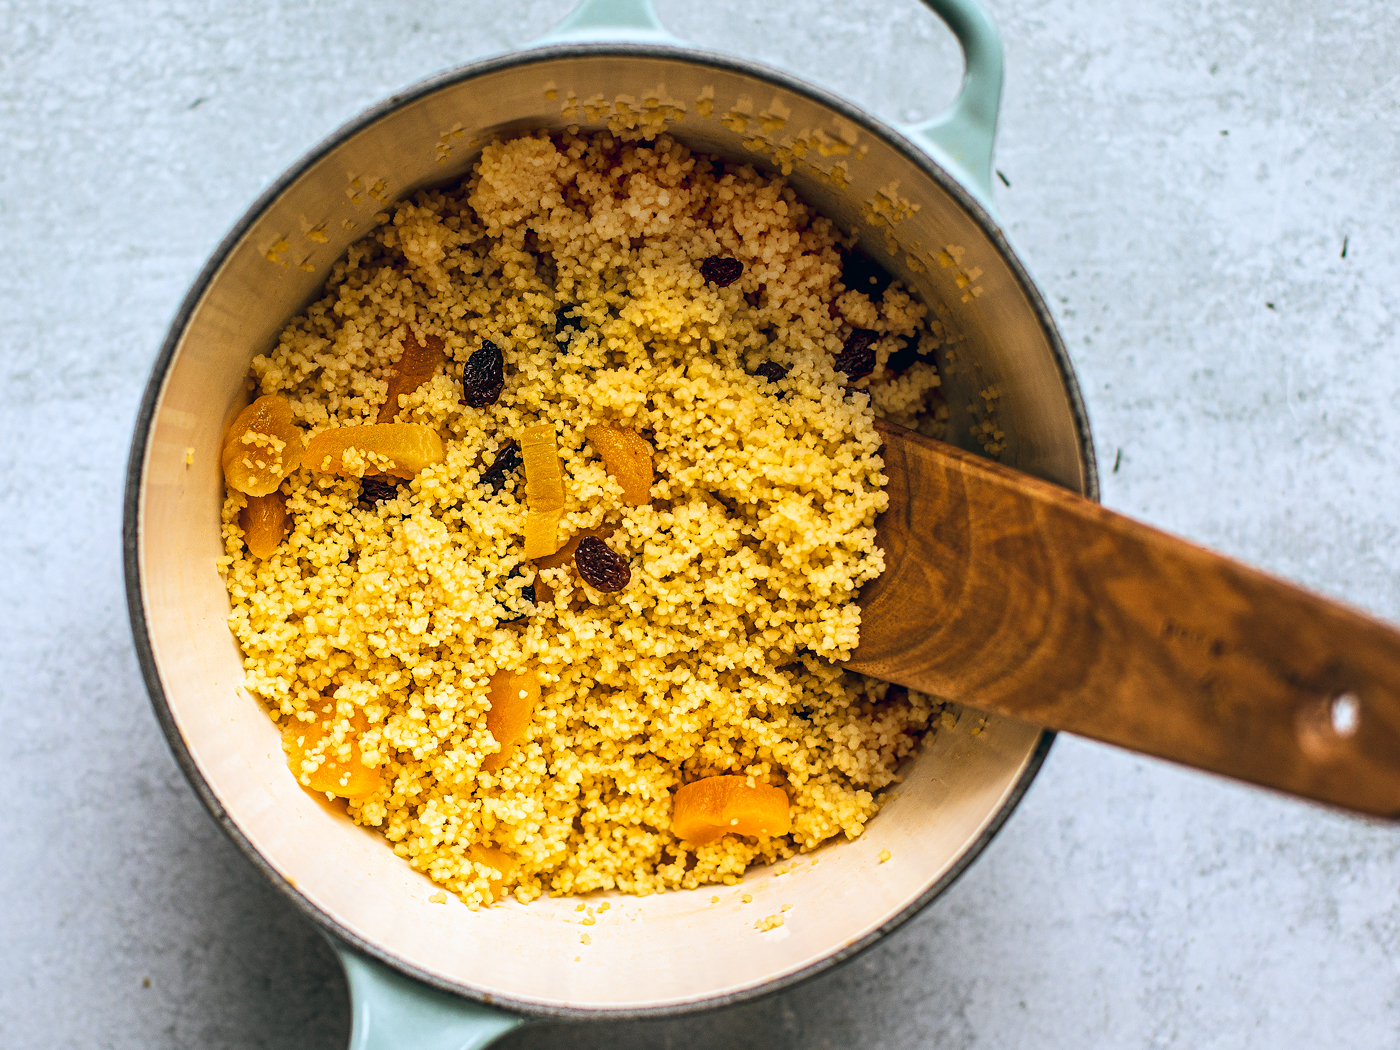 Small pot full of couscous, raisins, and apricots.